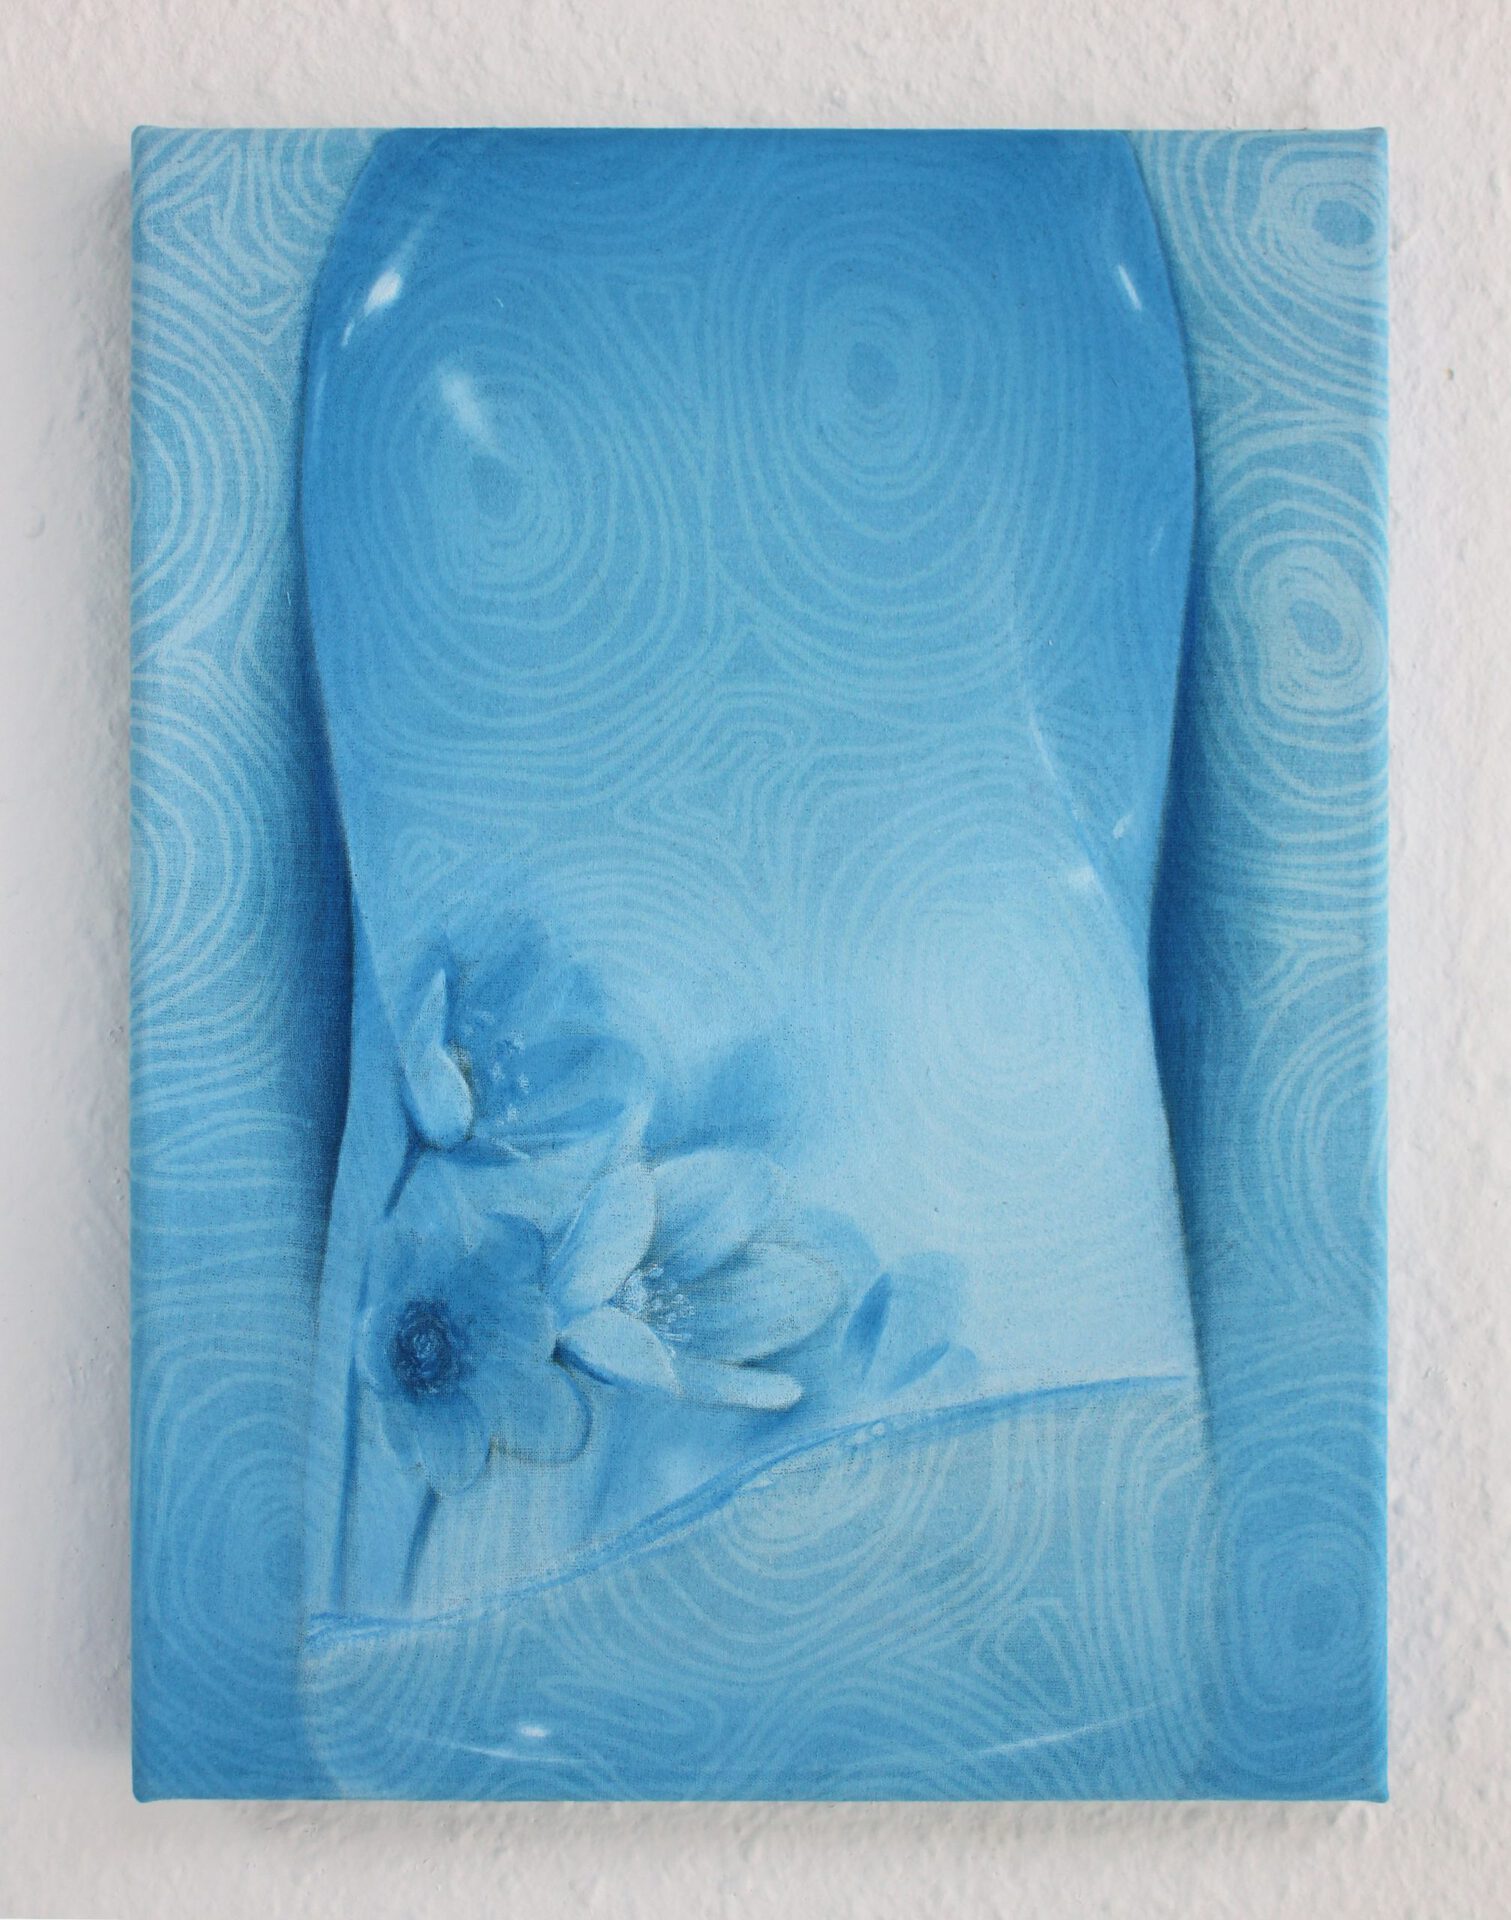 Leon Stoffelen, Fructose Microdose, oil on stretched pillow case, 45 x 30 cm, 2020